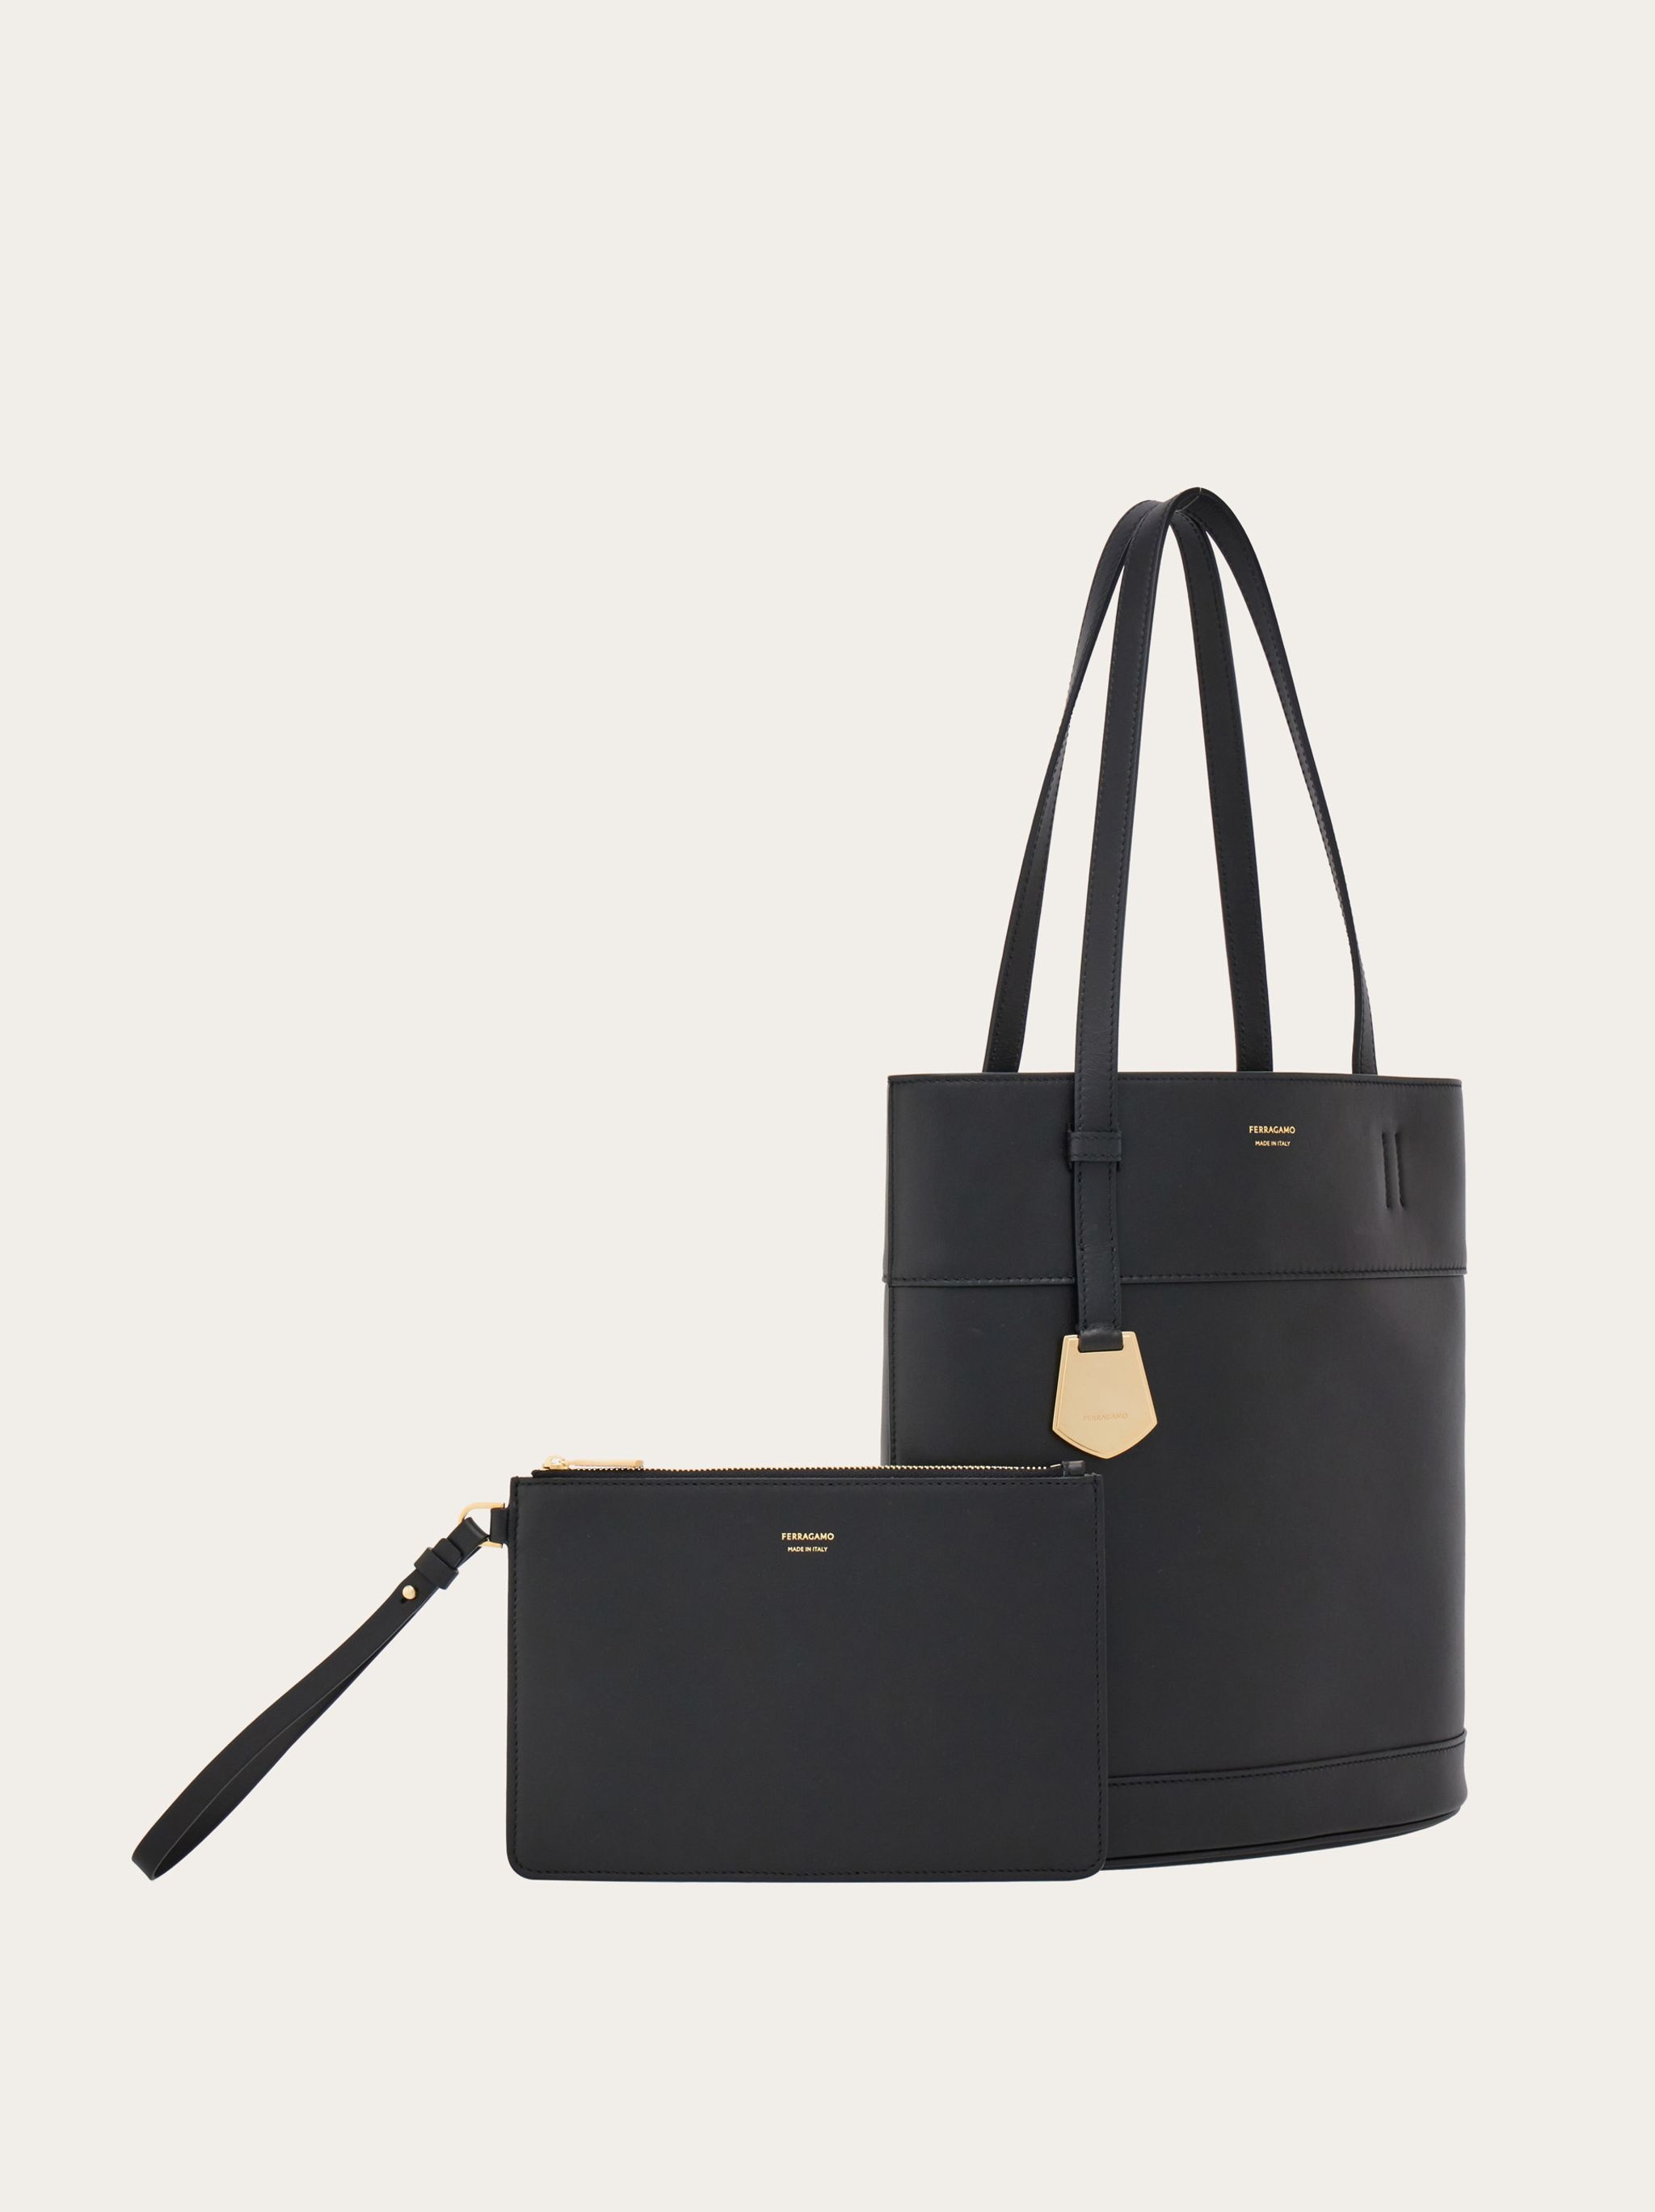 North-South charming tote bag (S) - 7